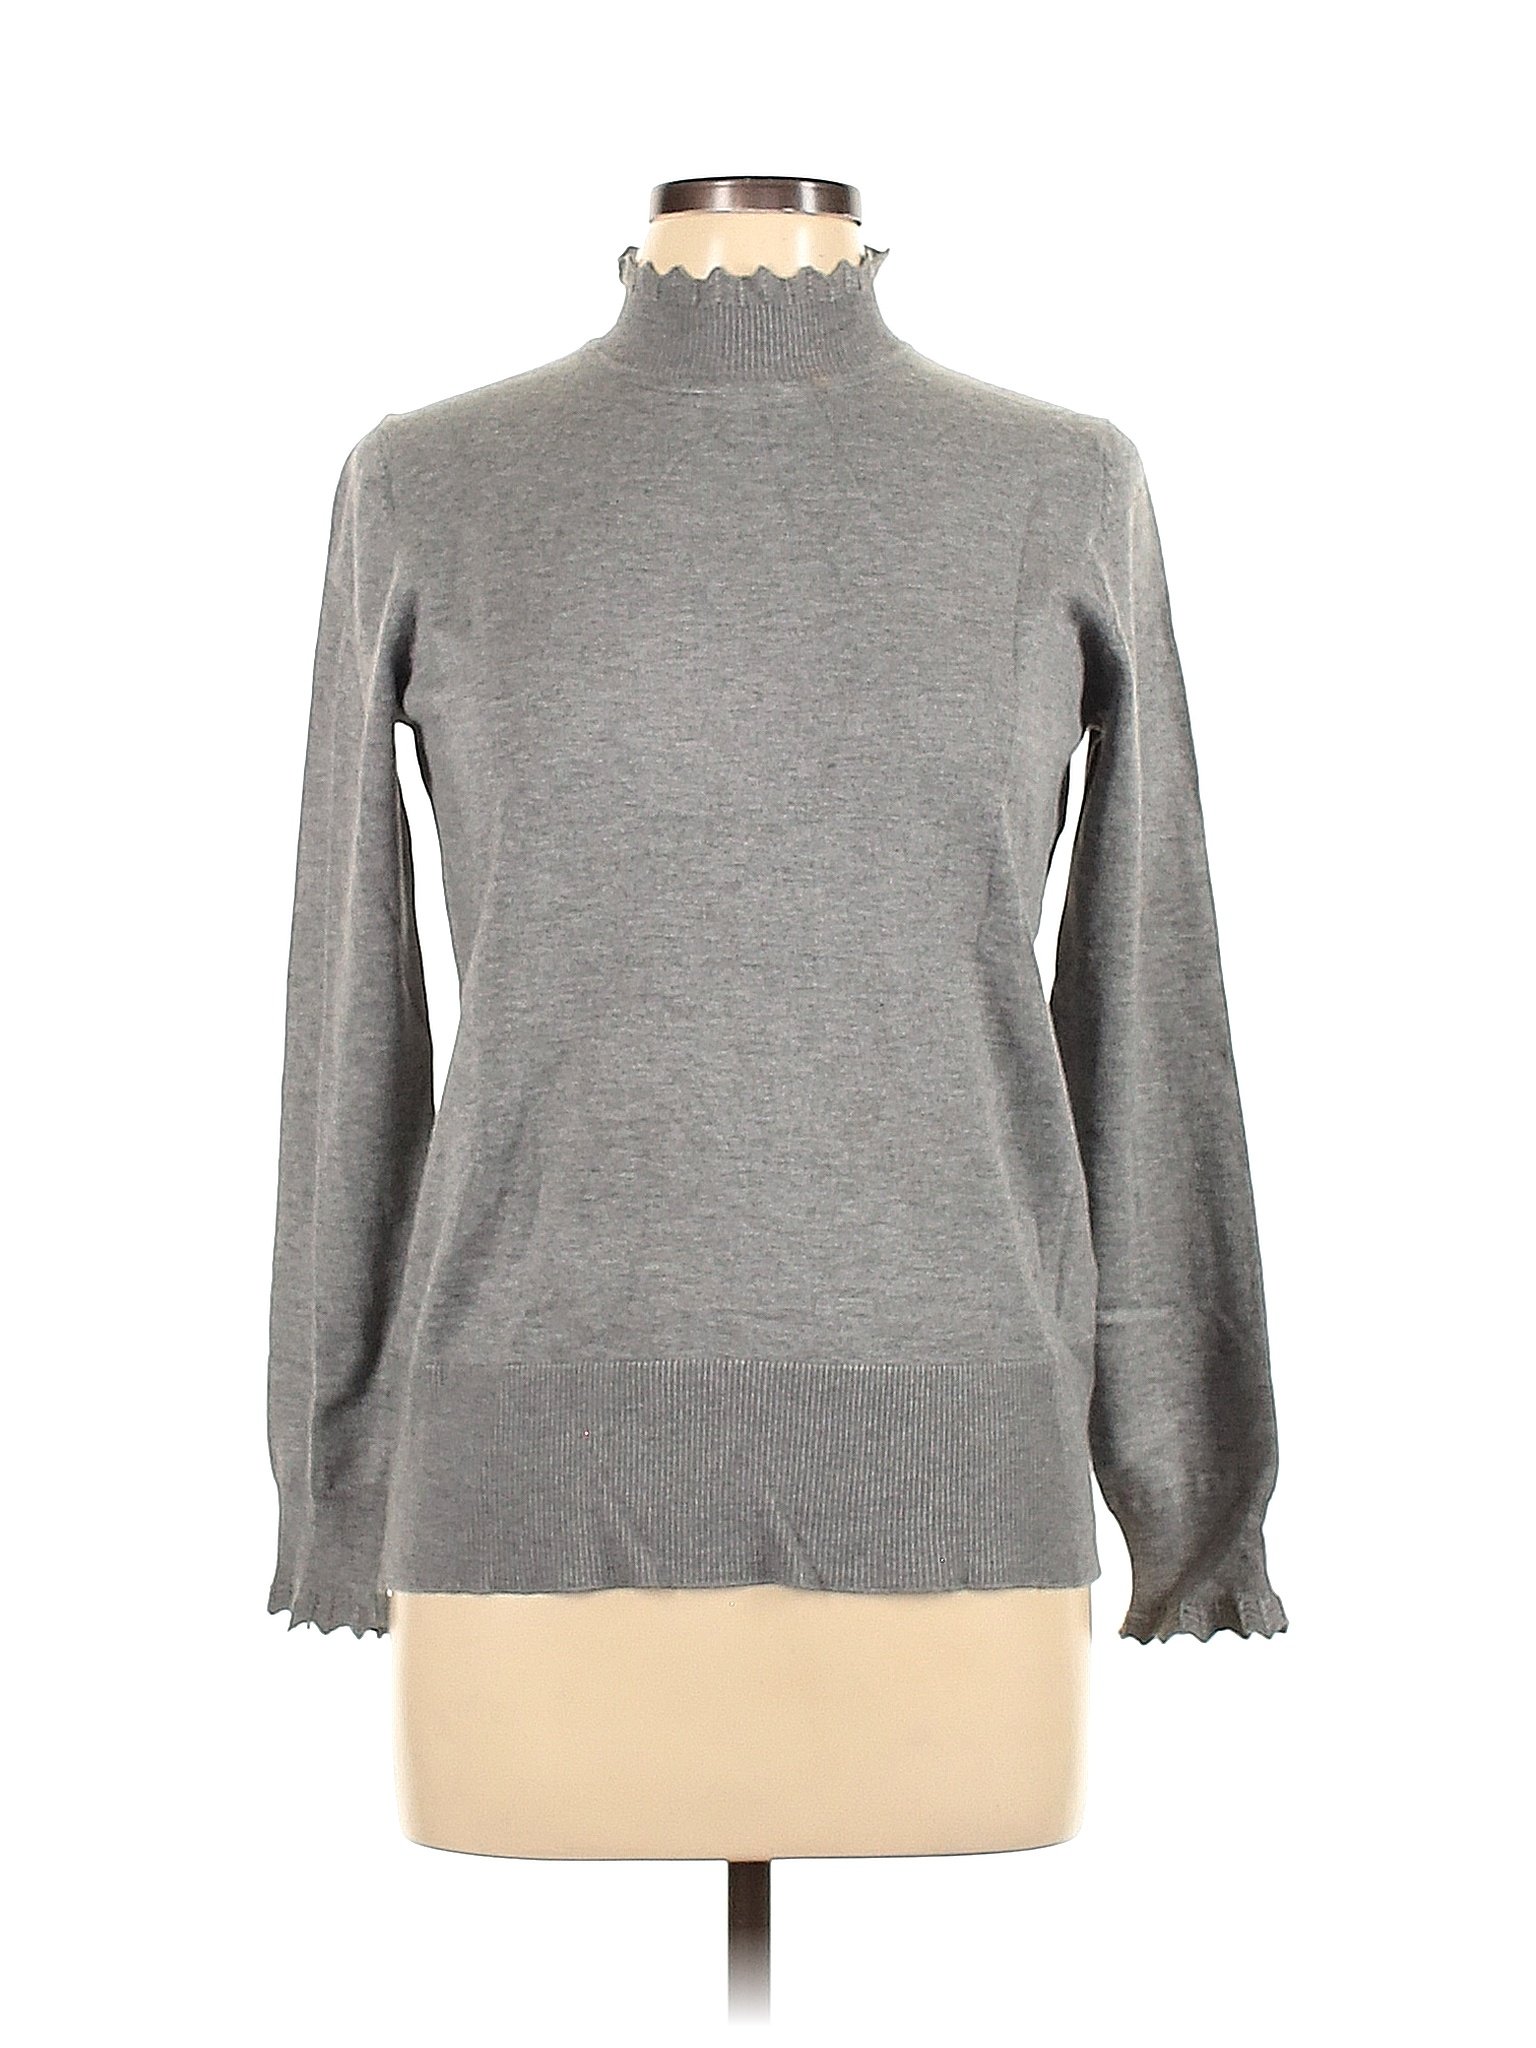 Cable & Gauge Gray Turtleneck Sweater Size M - 63% off | thredUP